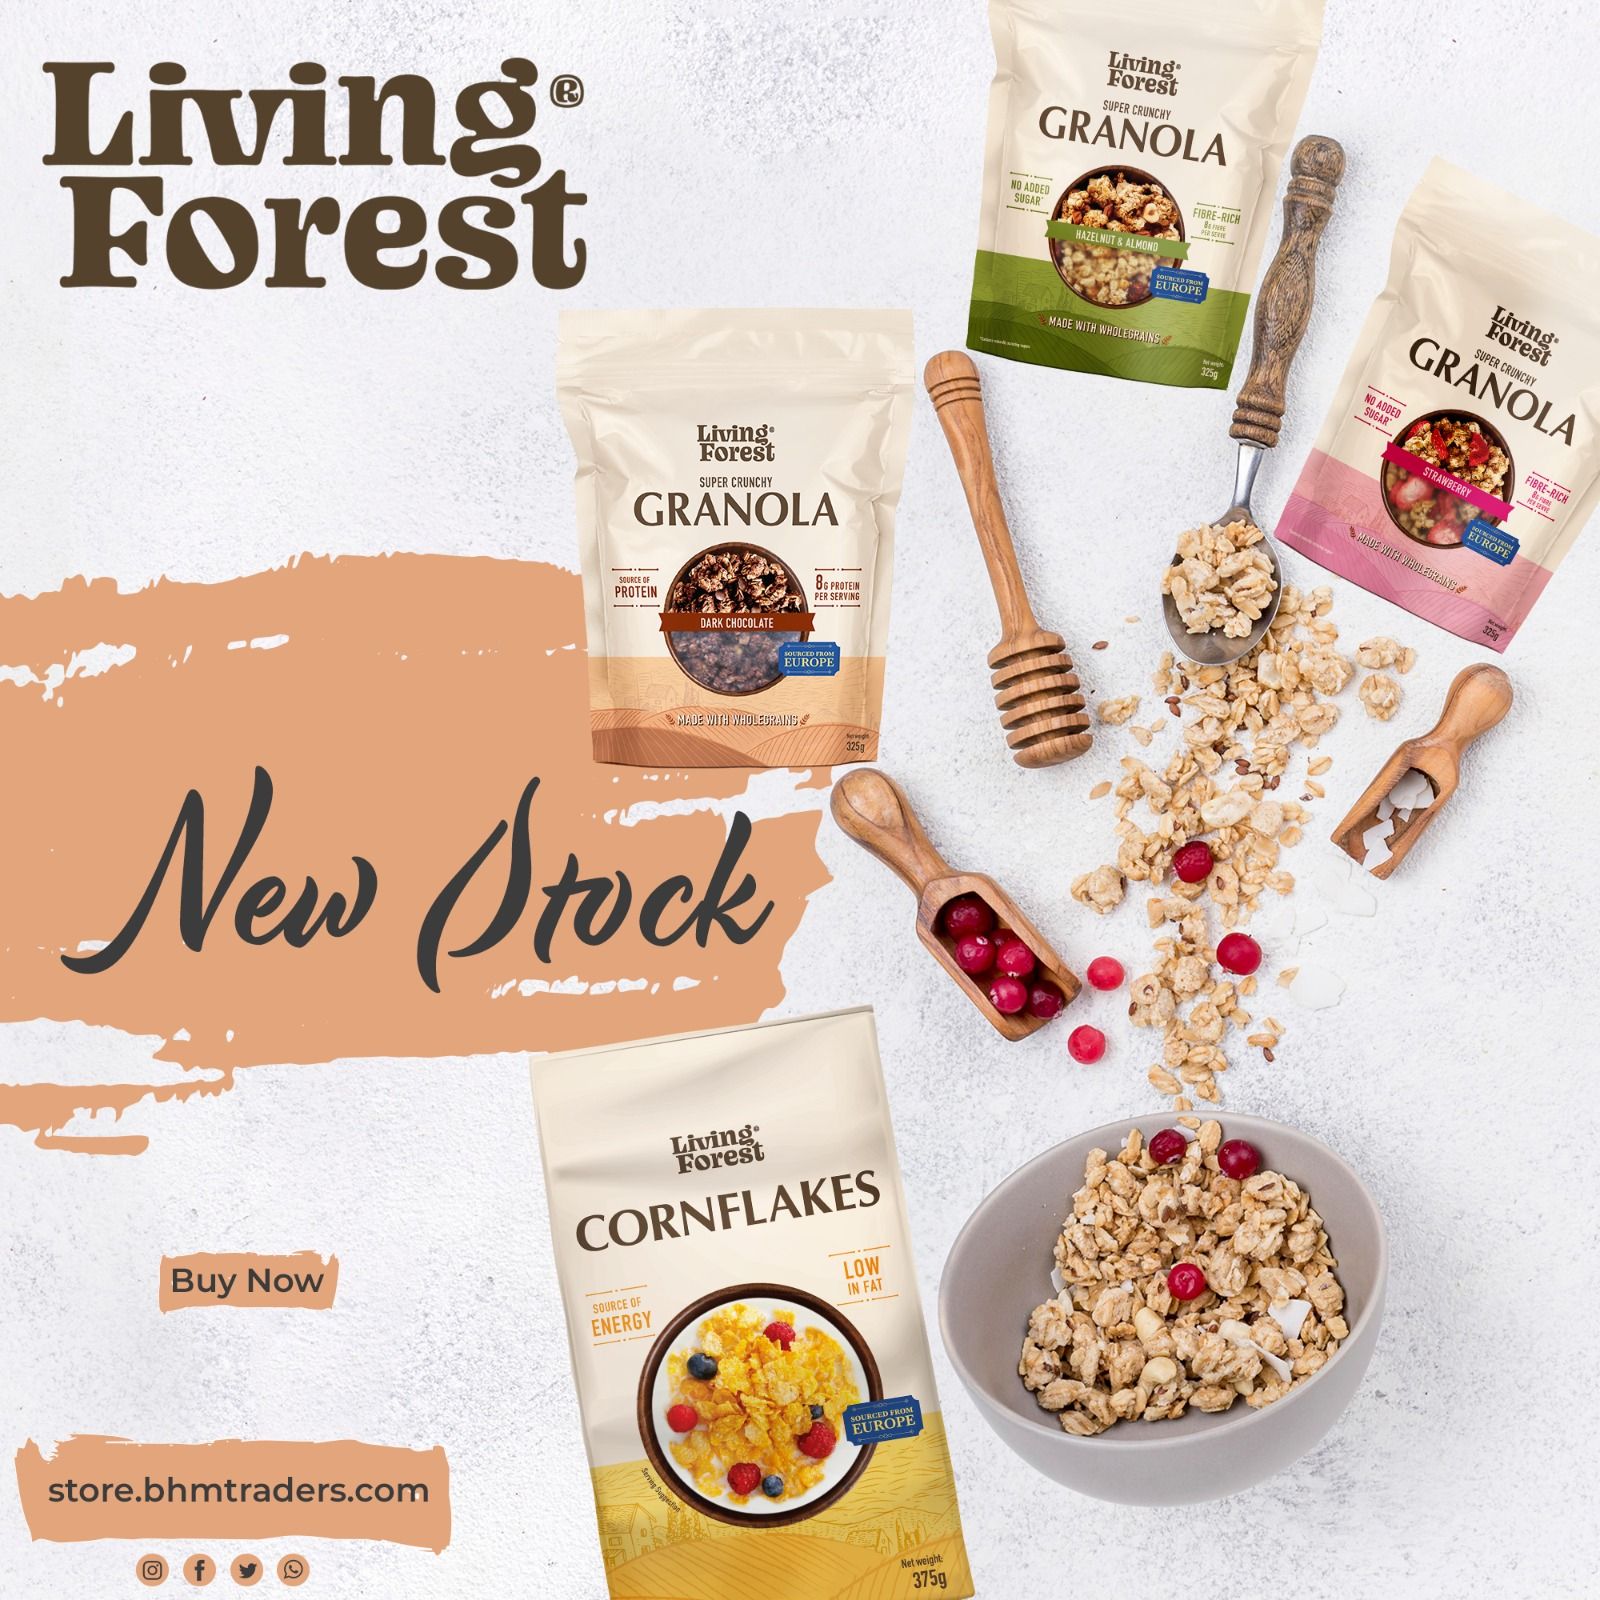 New Stock of Living Forest